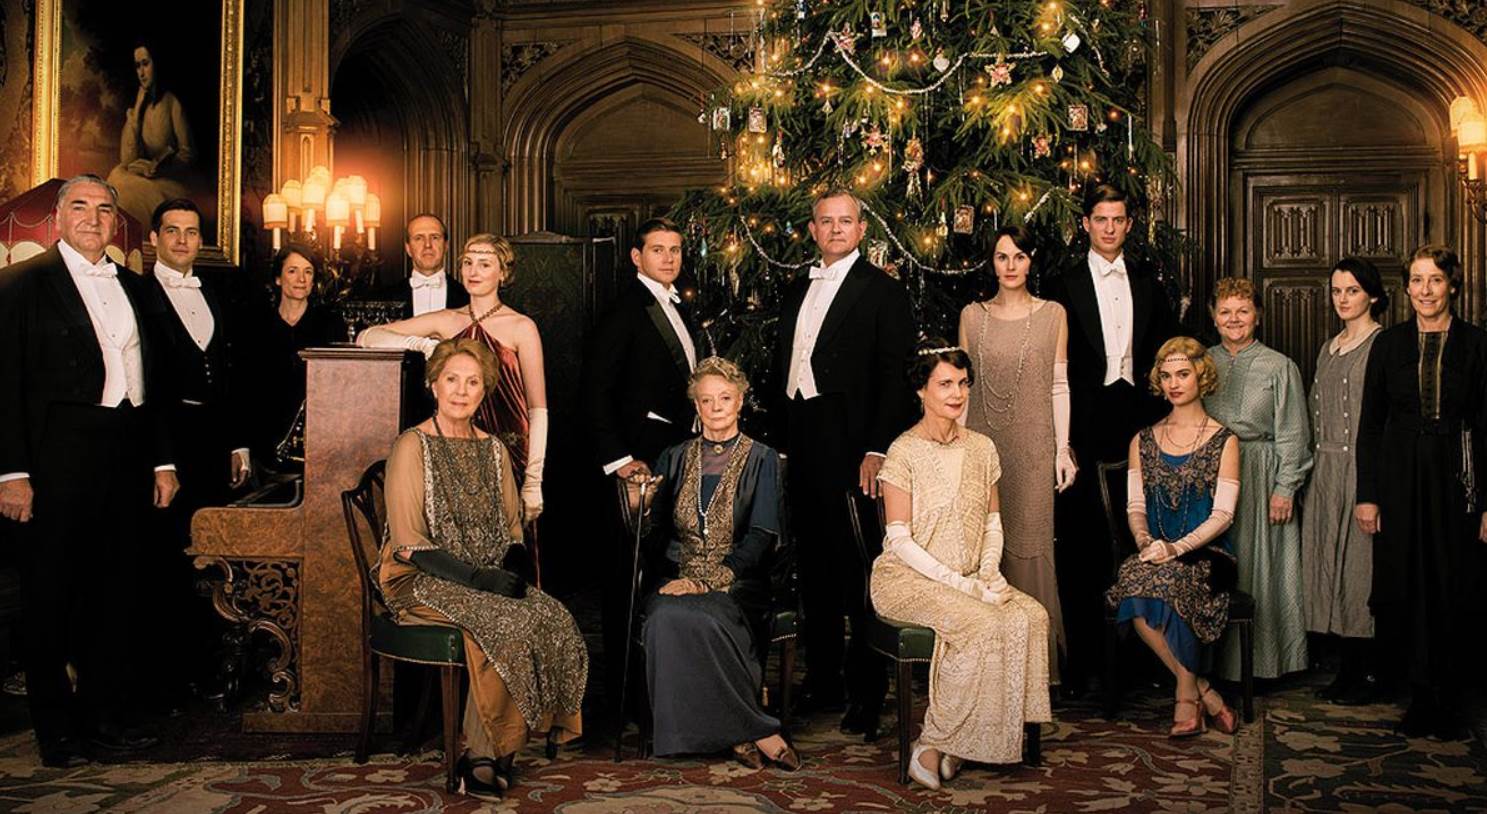 Official Announcements and Release Date Of Downton Abbey Season 7